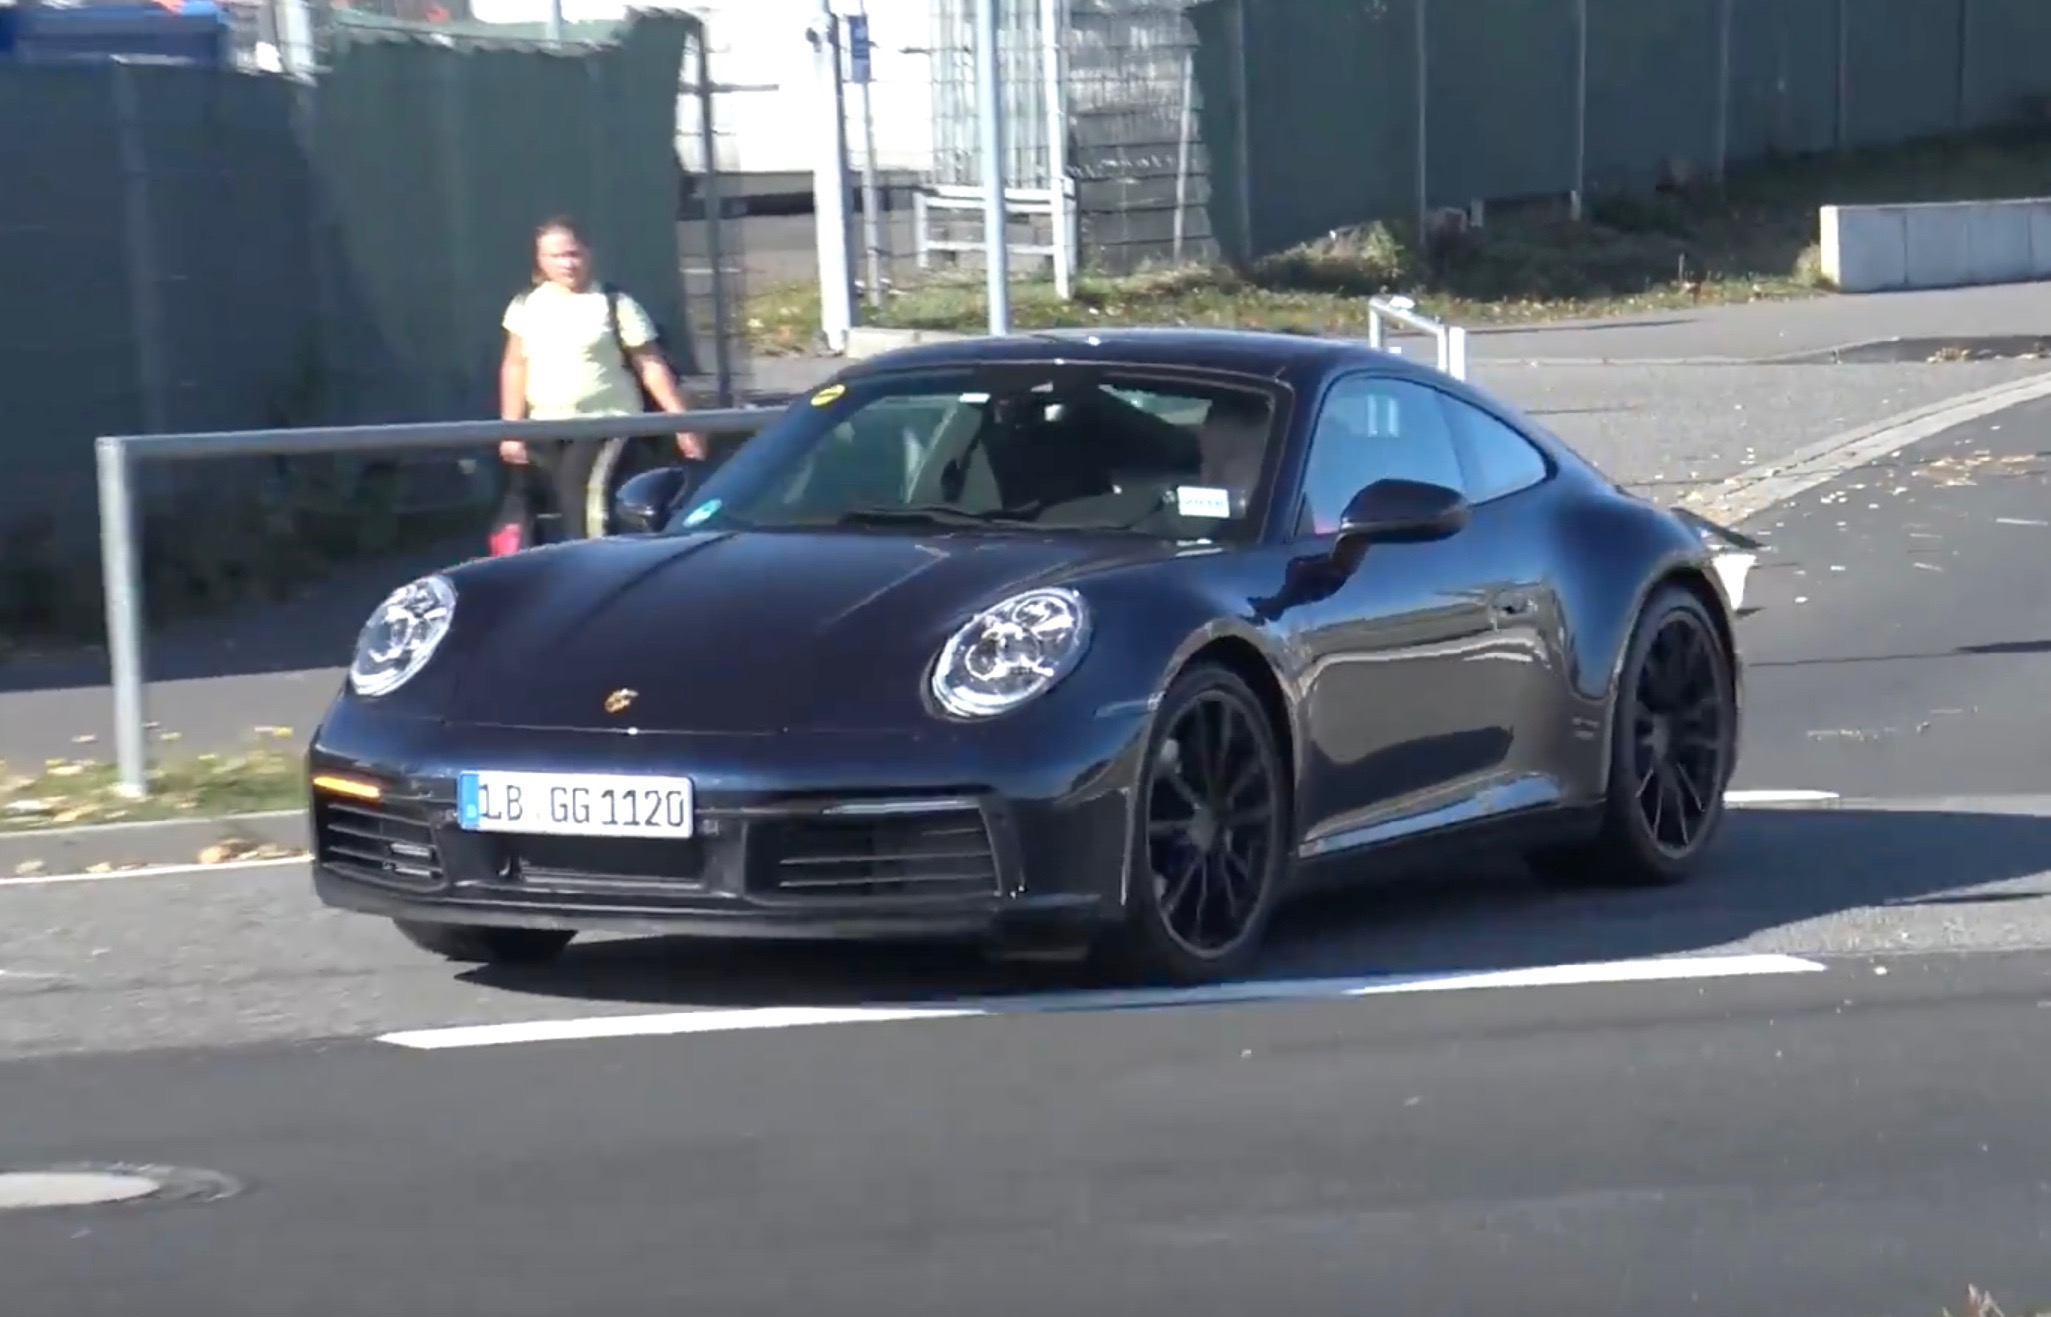 2019 Porsche 992 911 spotted, almost camouflage-free (video)